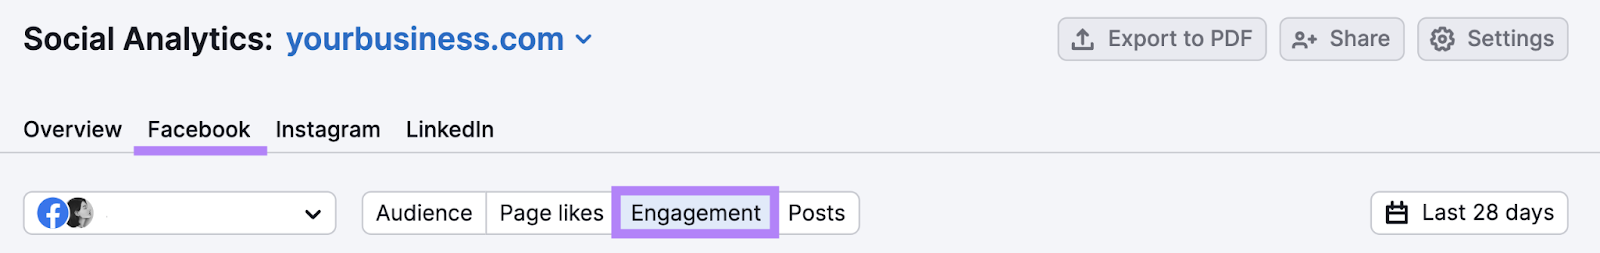 Facebook report and engagement data options selected